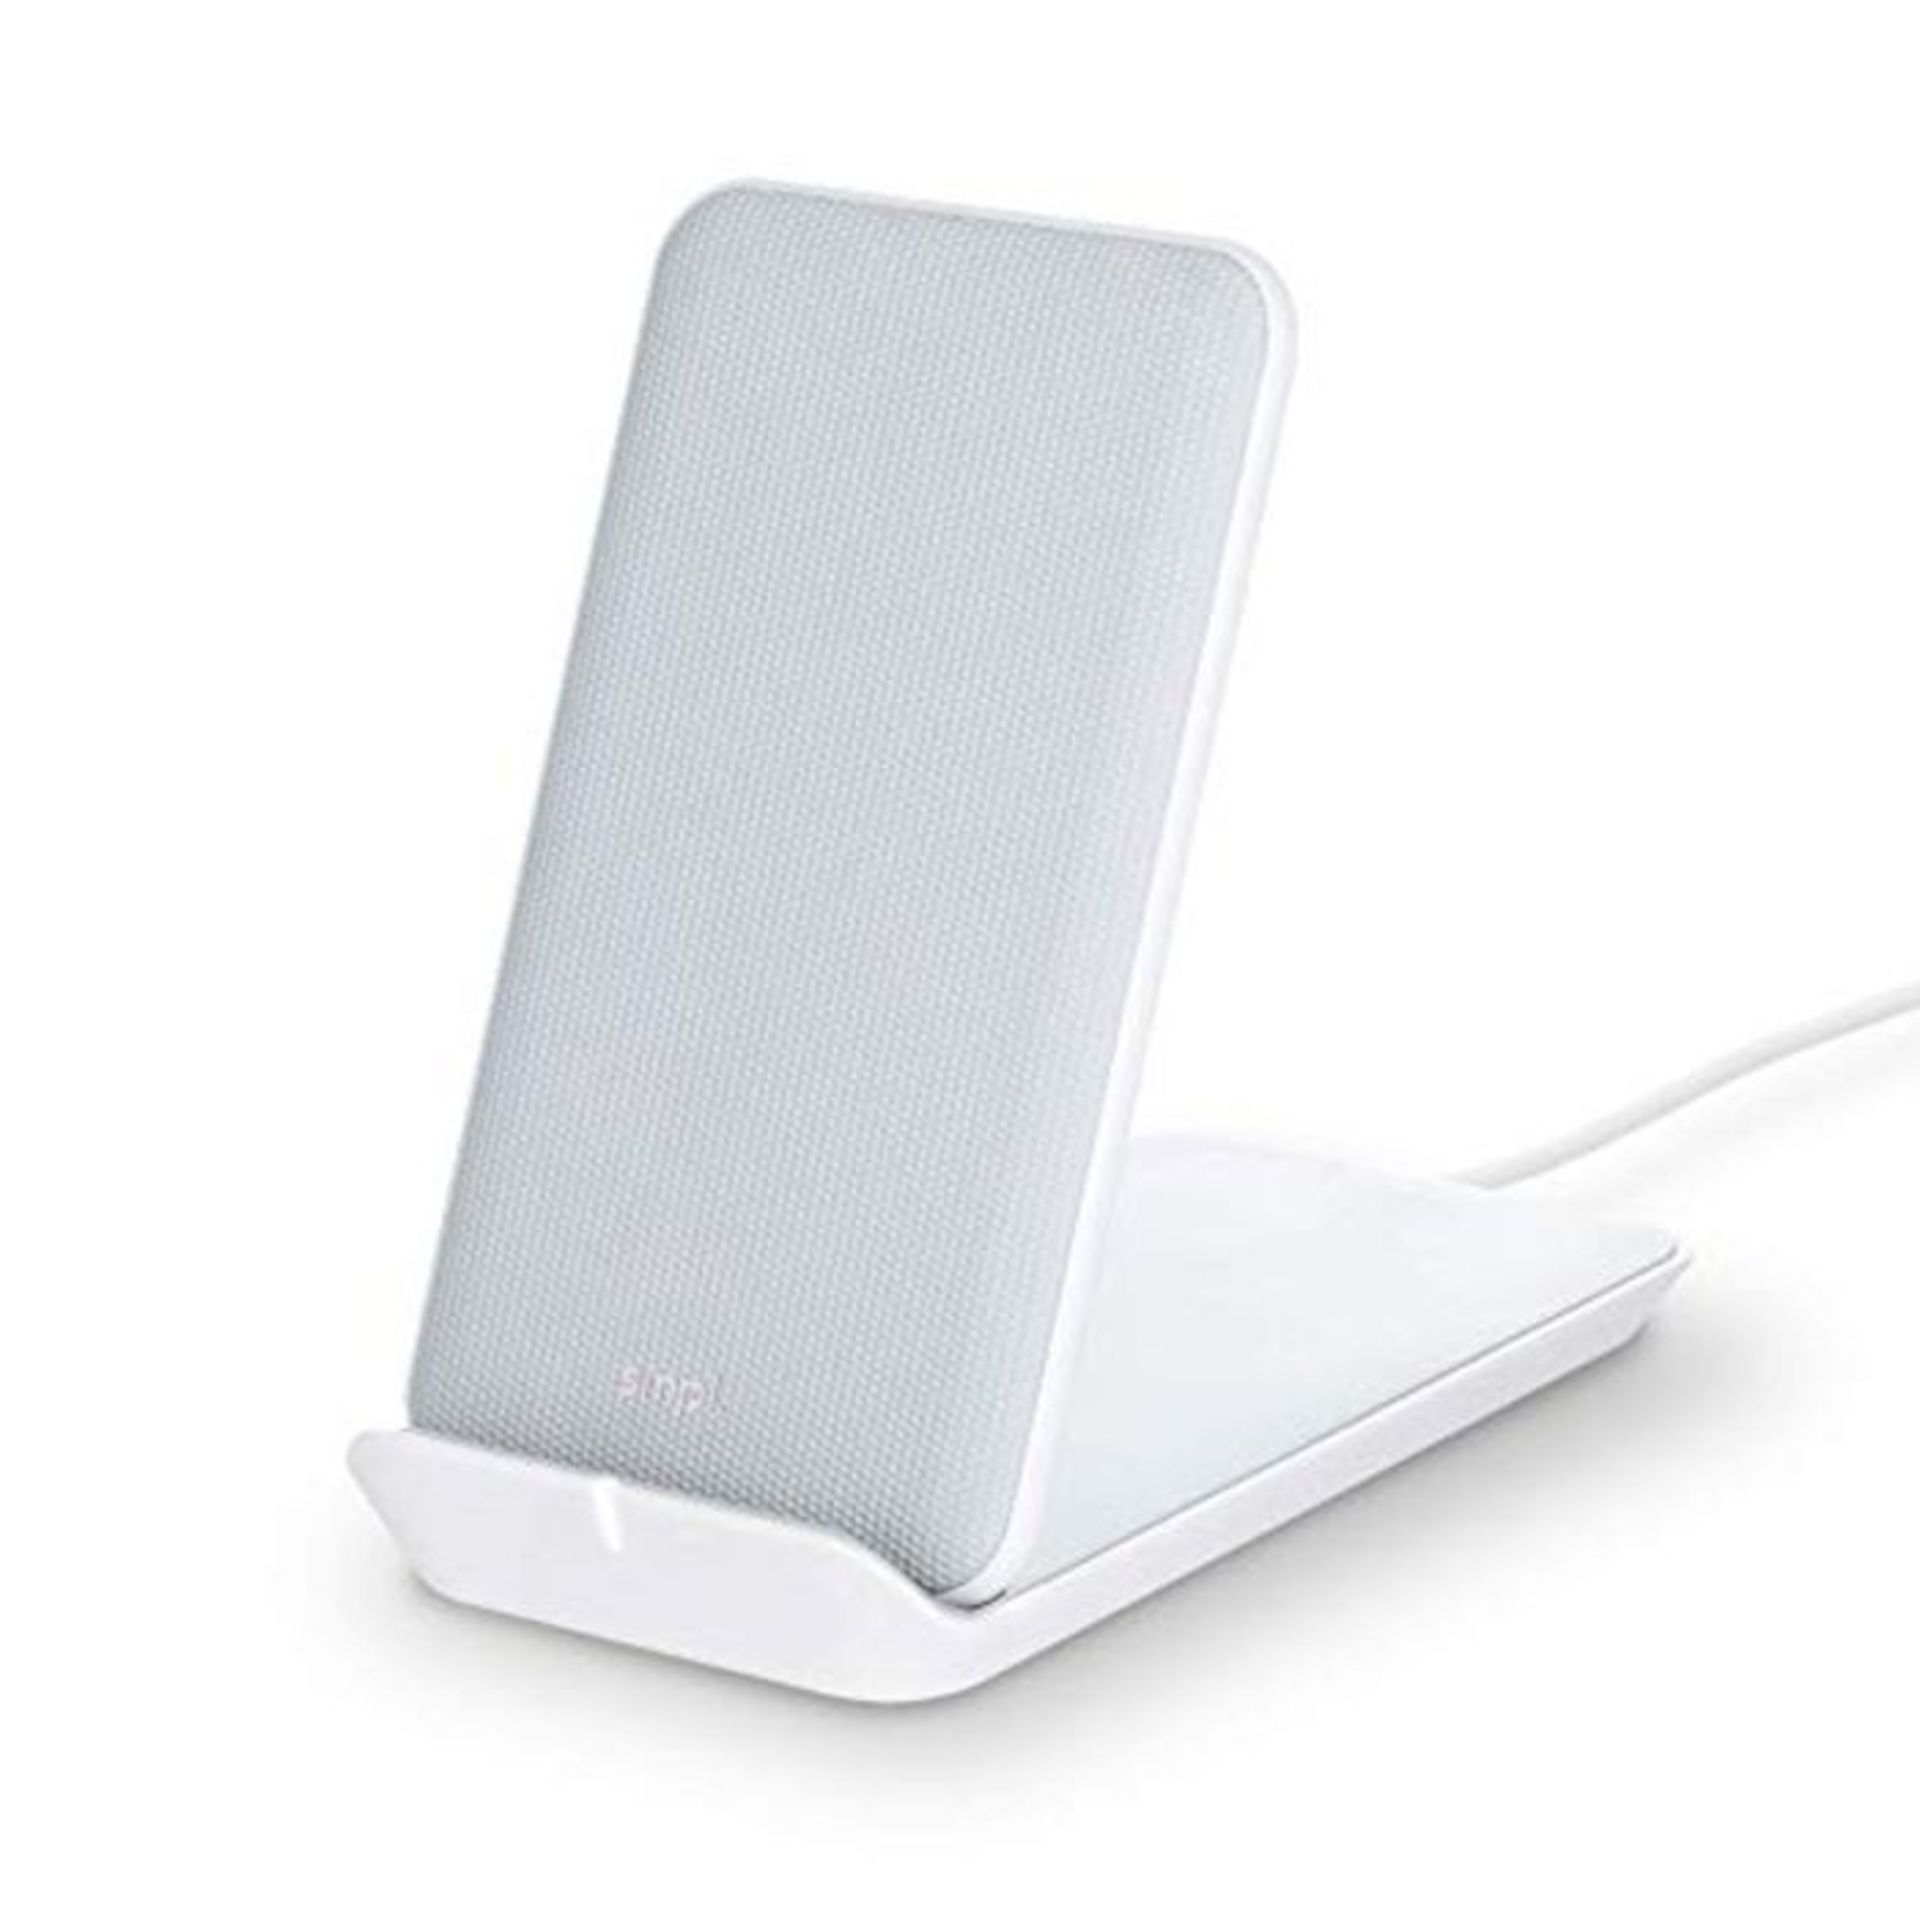 Smpl Fast Wireless Charger - Qi-Certified 10W Wireless Charging Stand, Compatible with